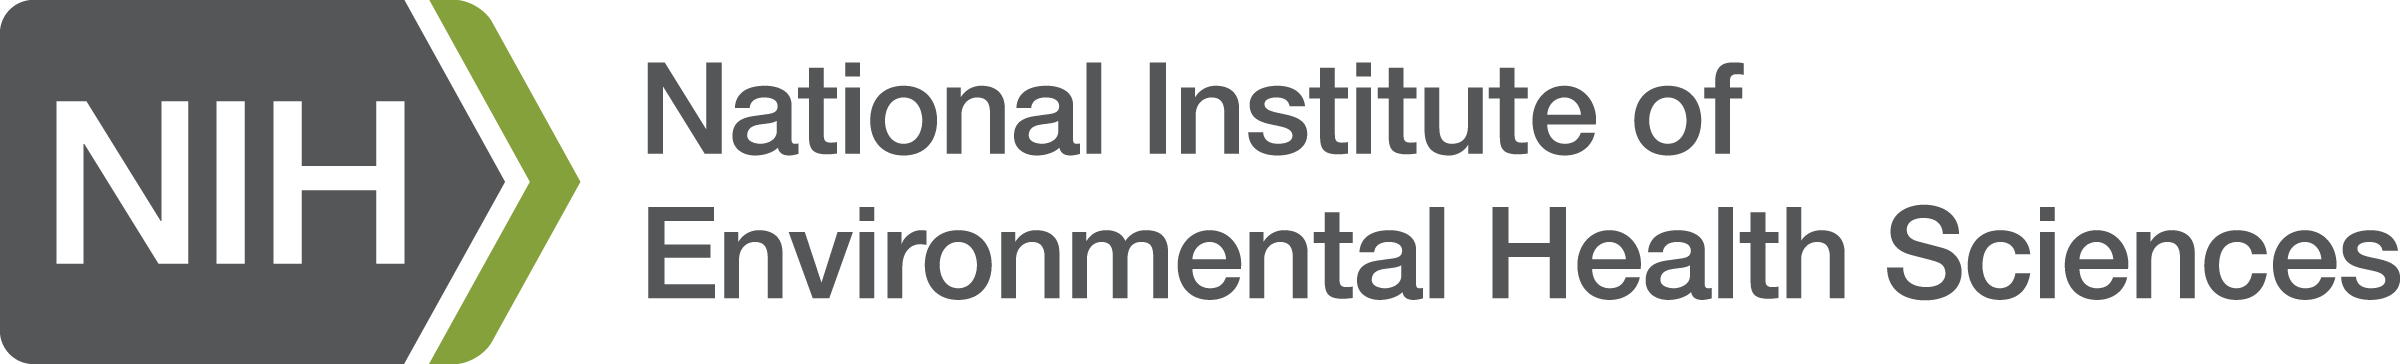 national health institute of environmental health sciences